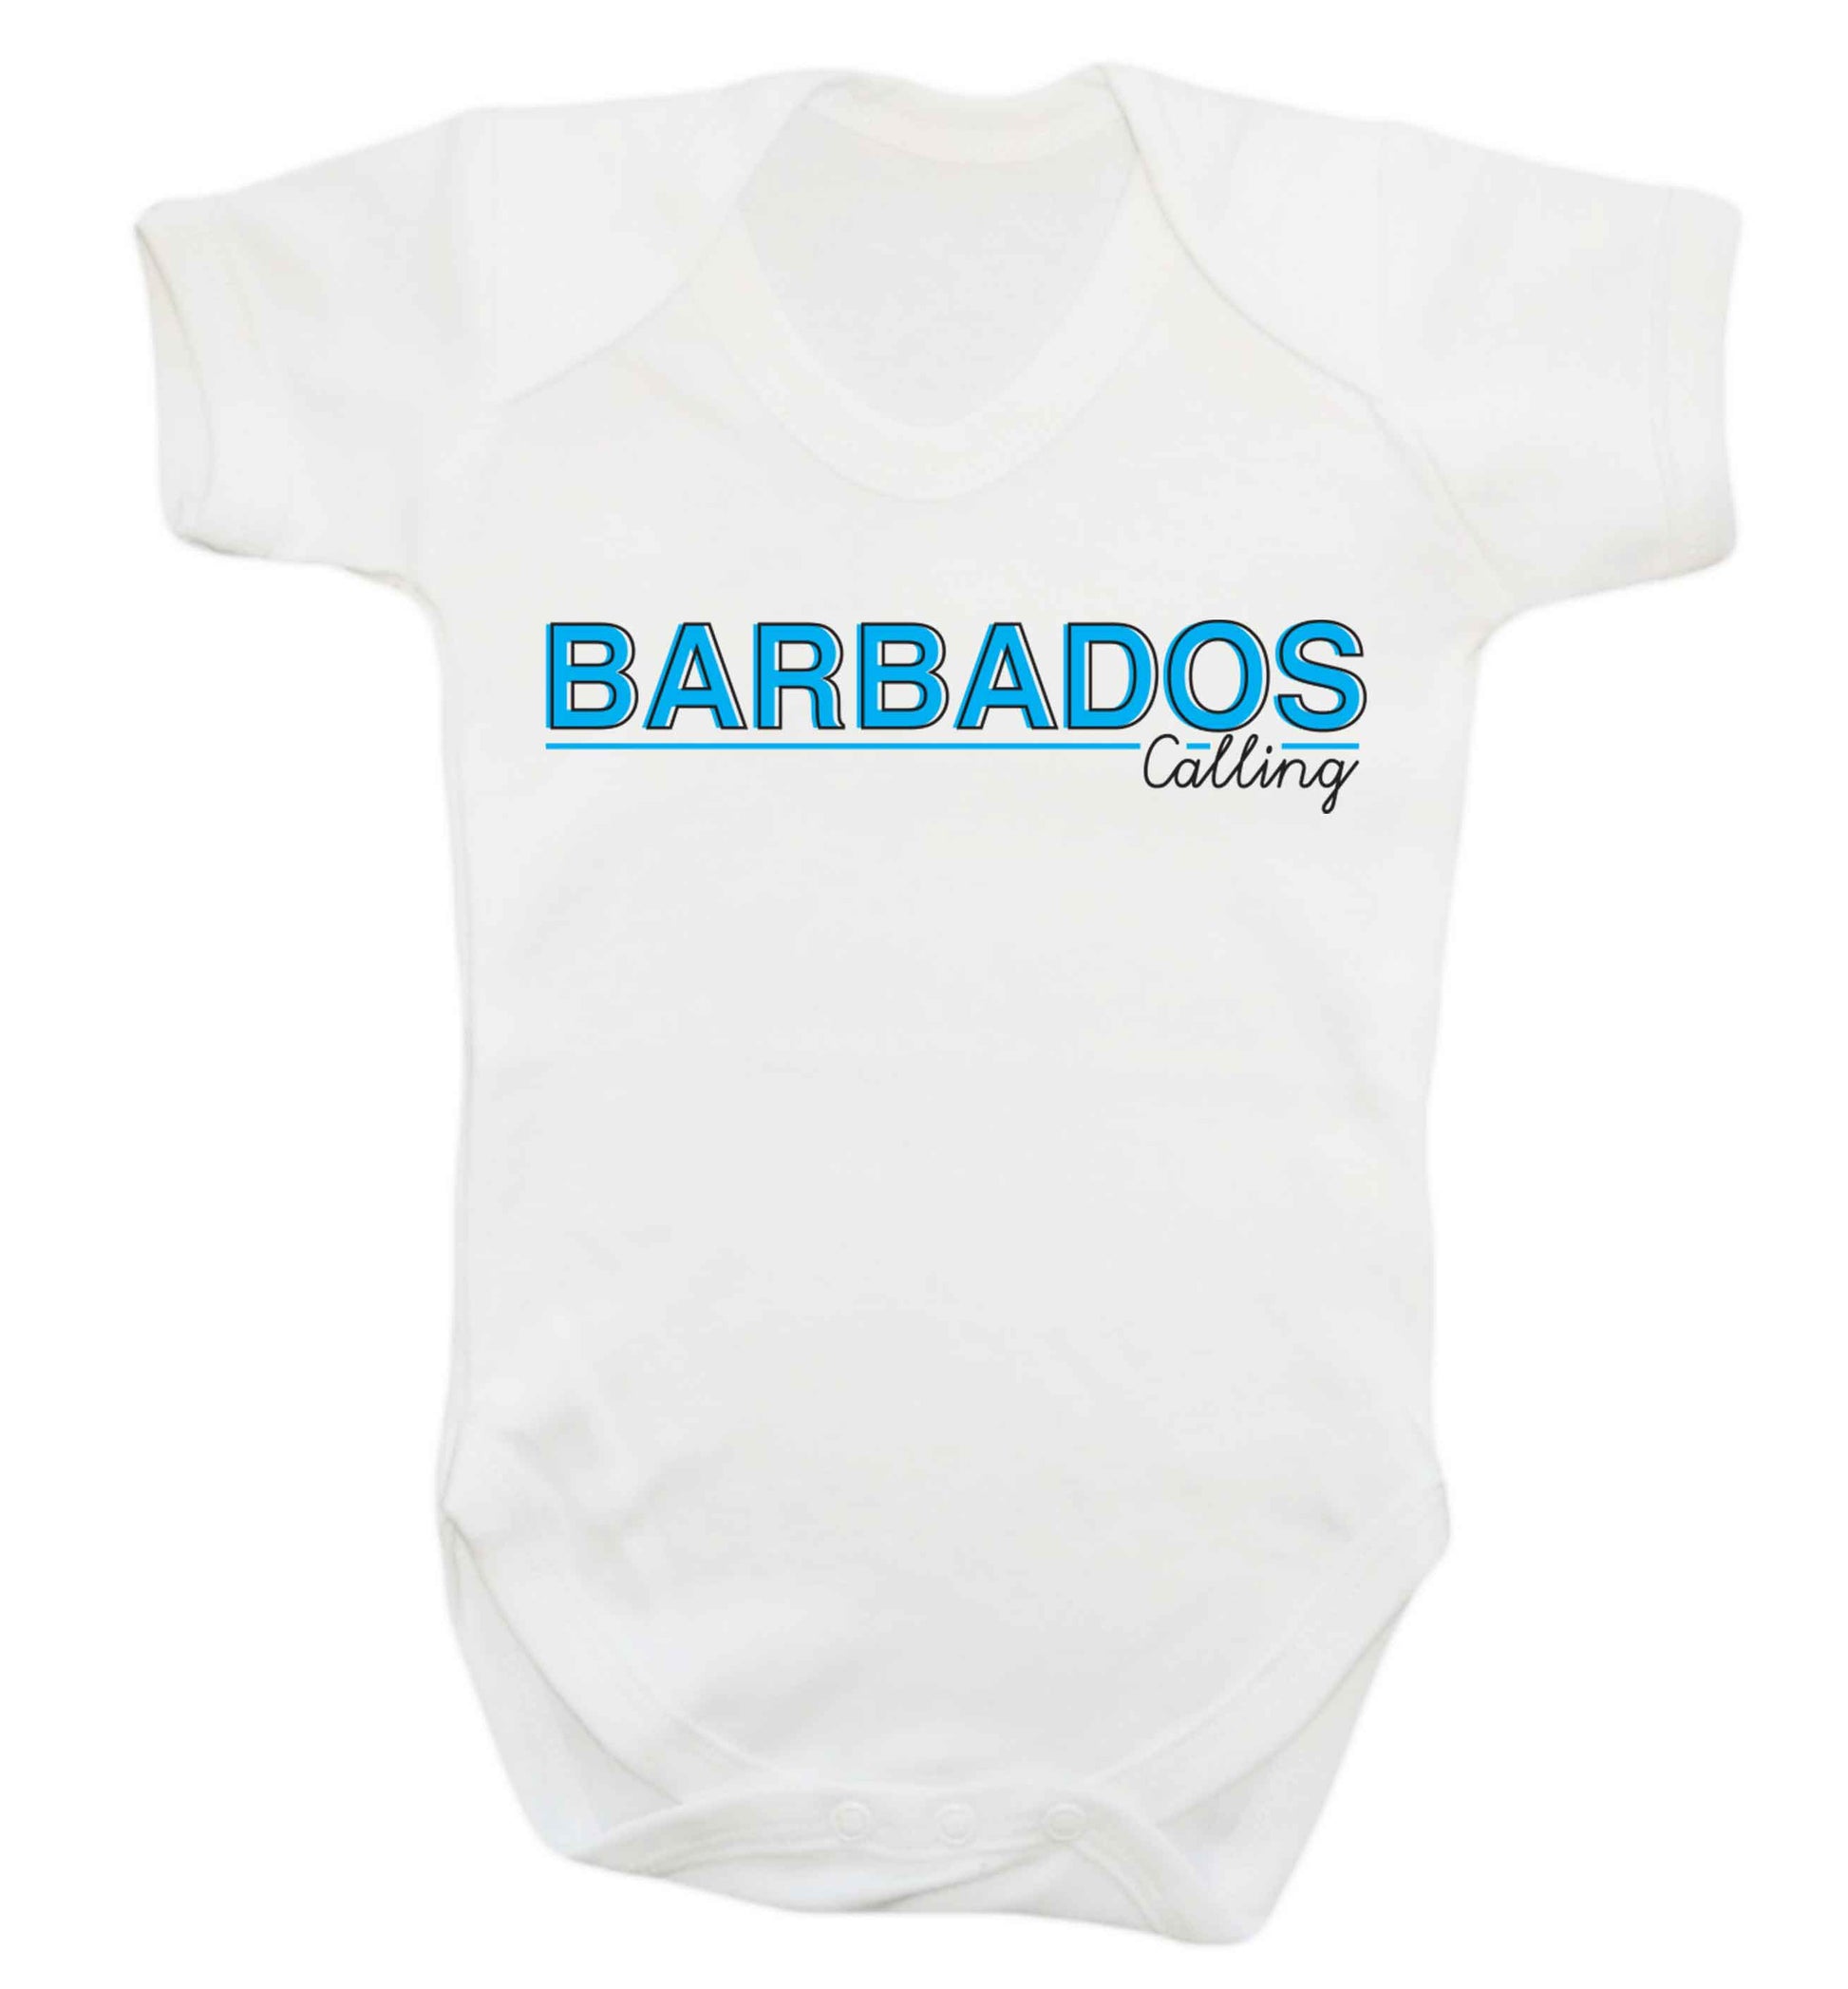 Barbados calling Baby Vest white 18-24 months